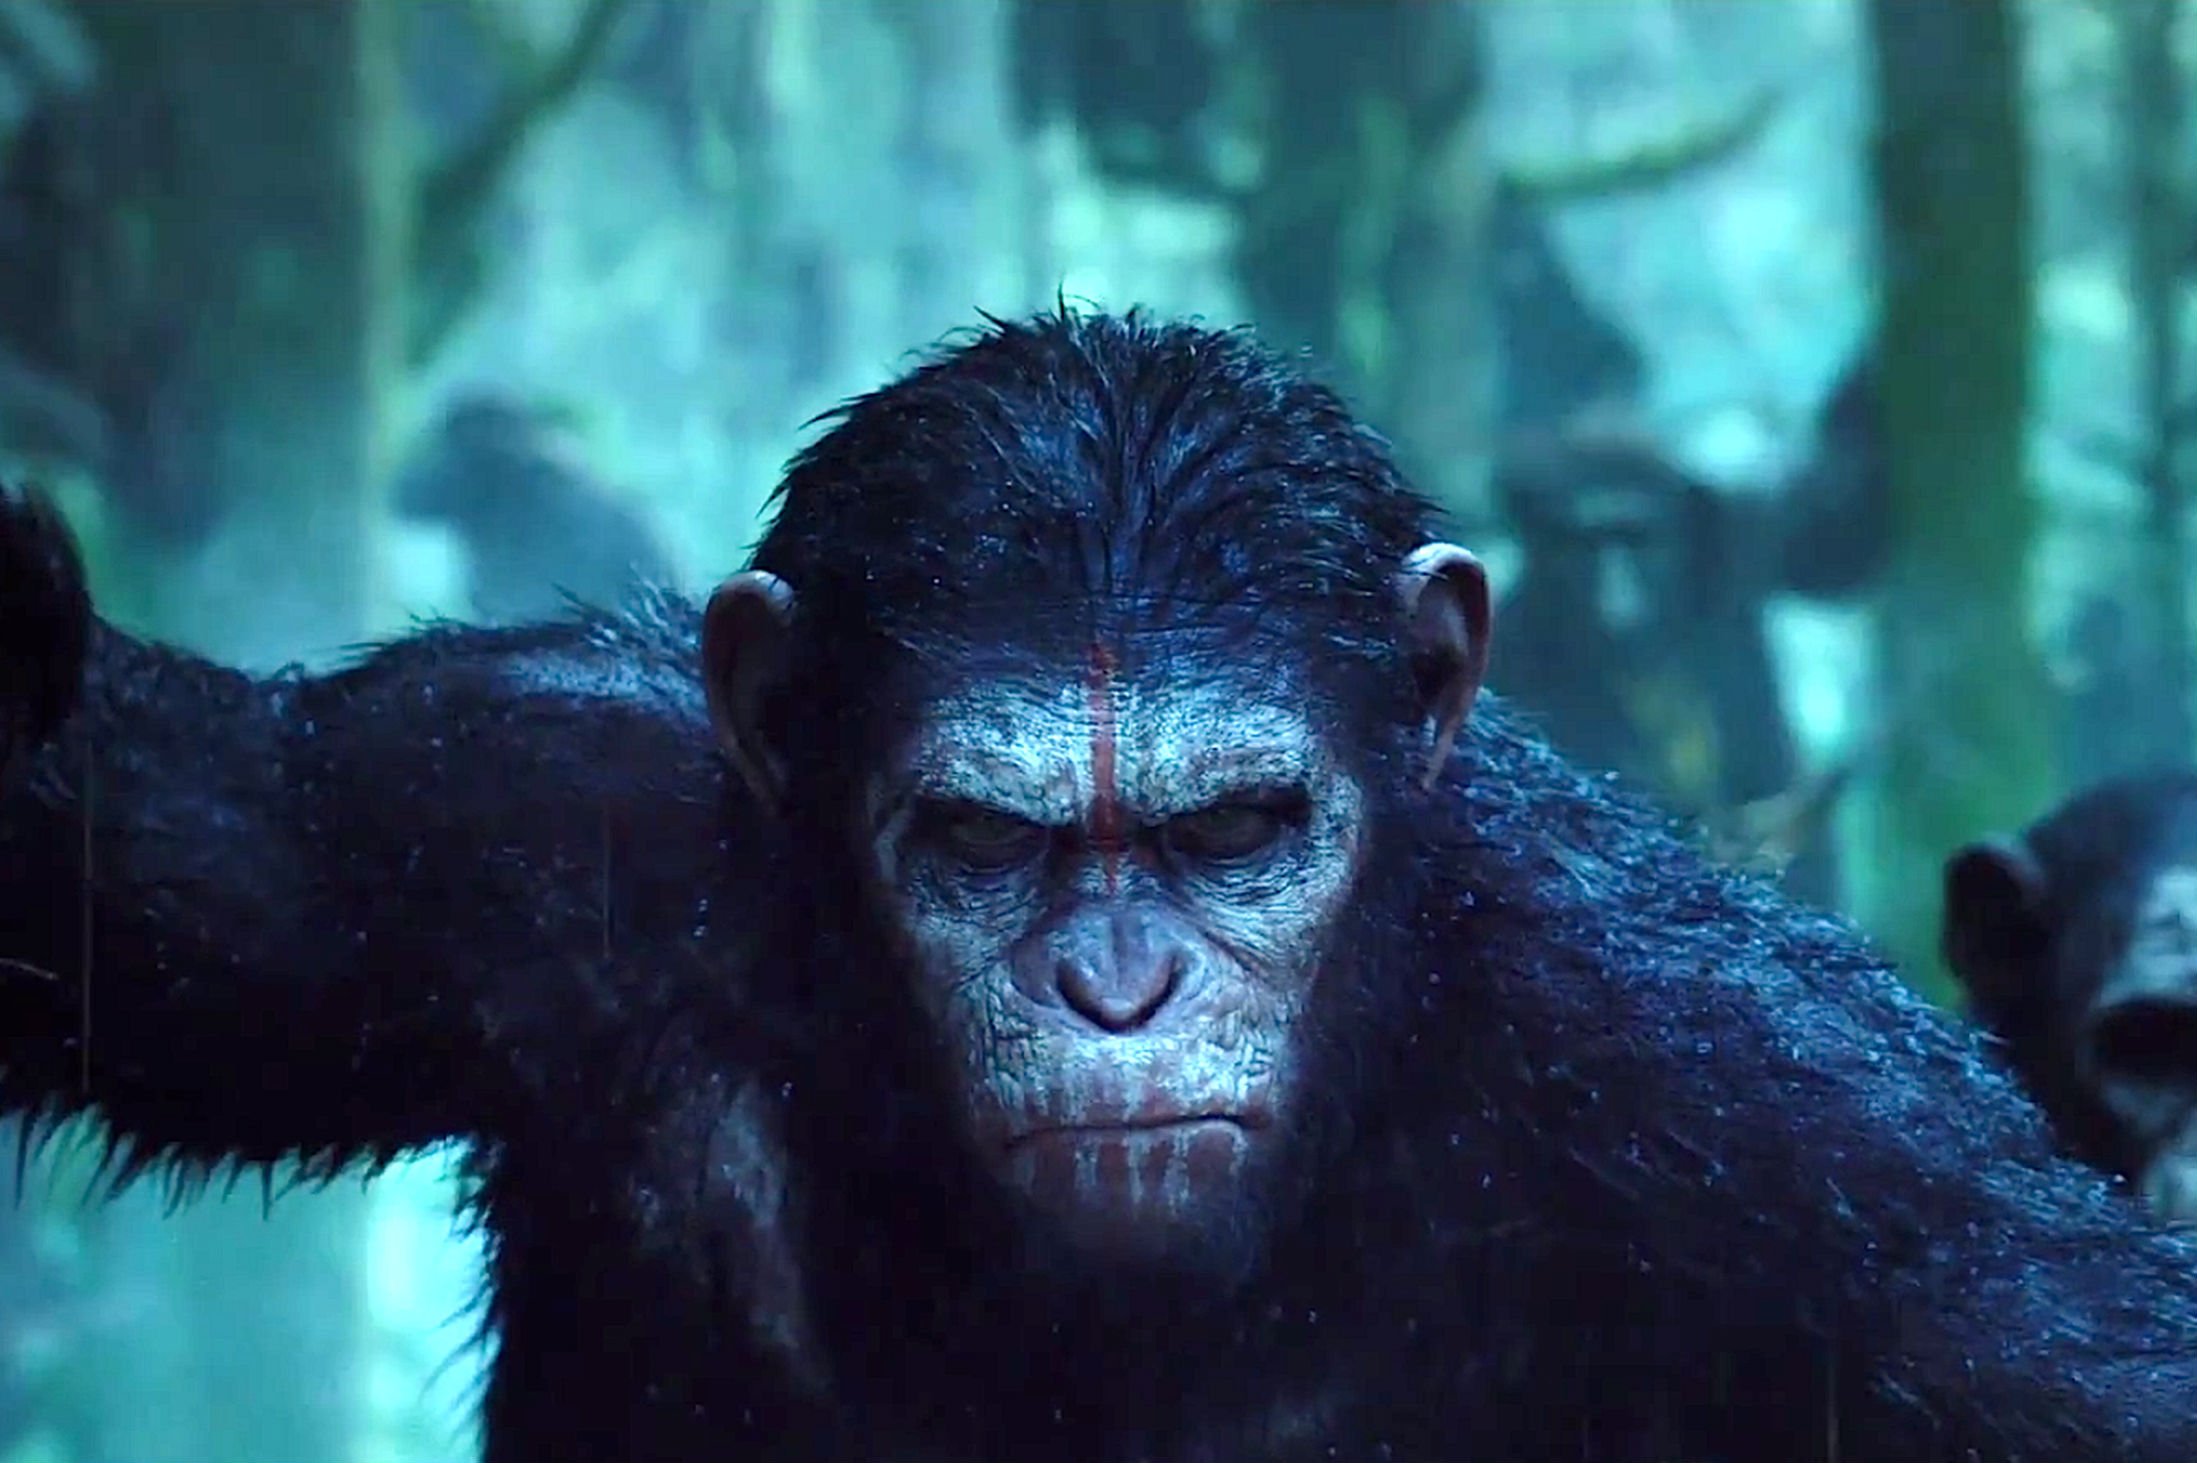 dawn of the apes, Action, Drama, Sci fi, Dawn, Planet, Apes, Monkey, Adventure Wallpaper